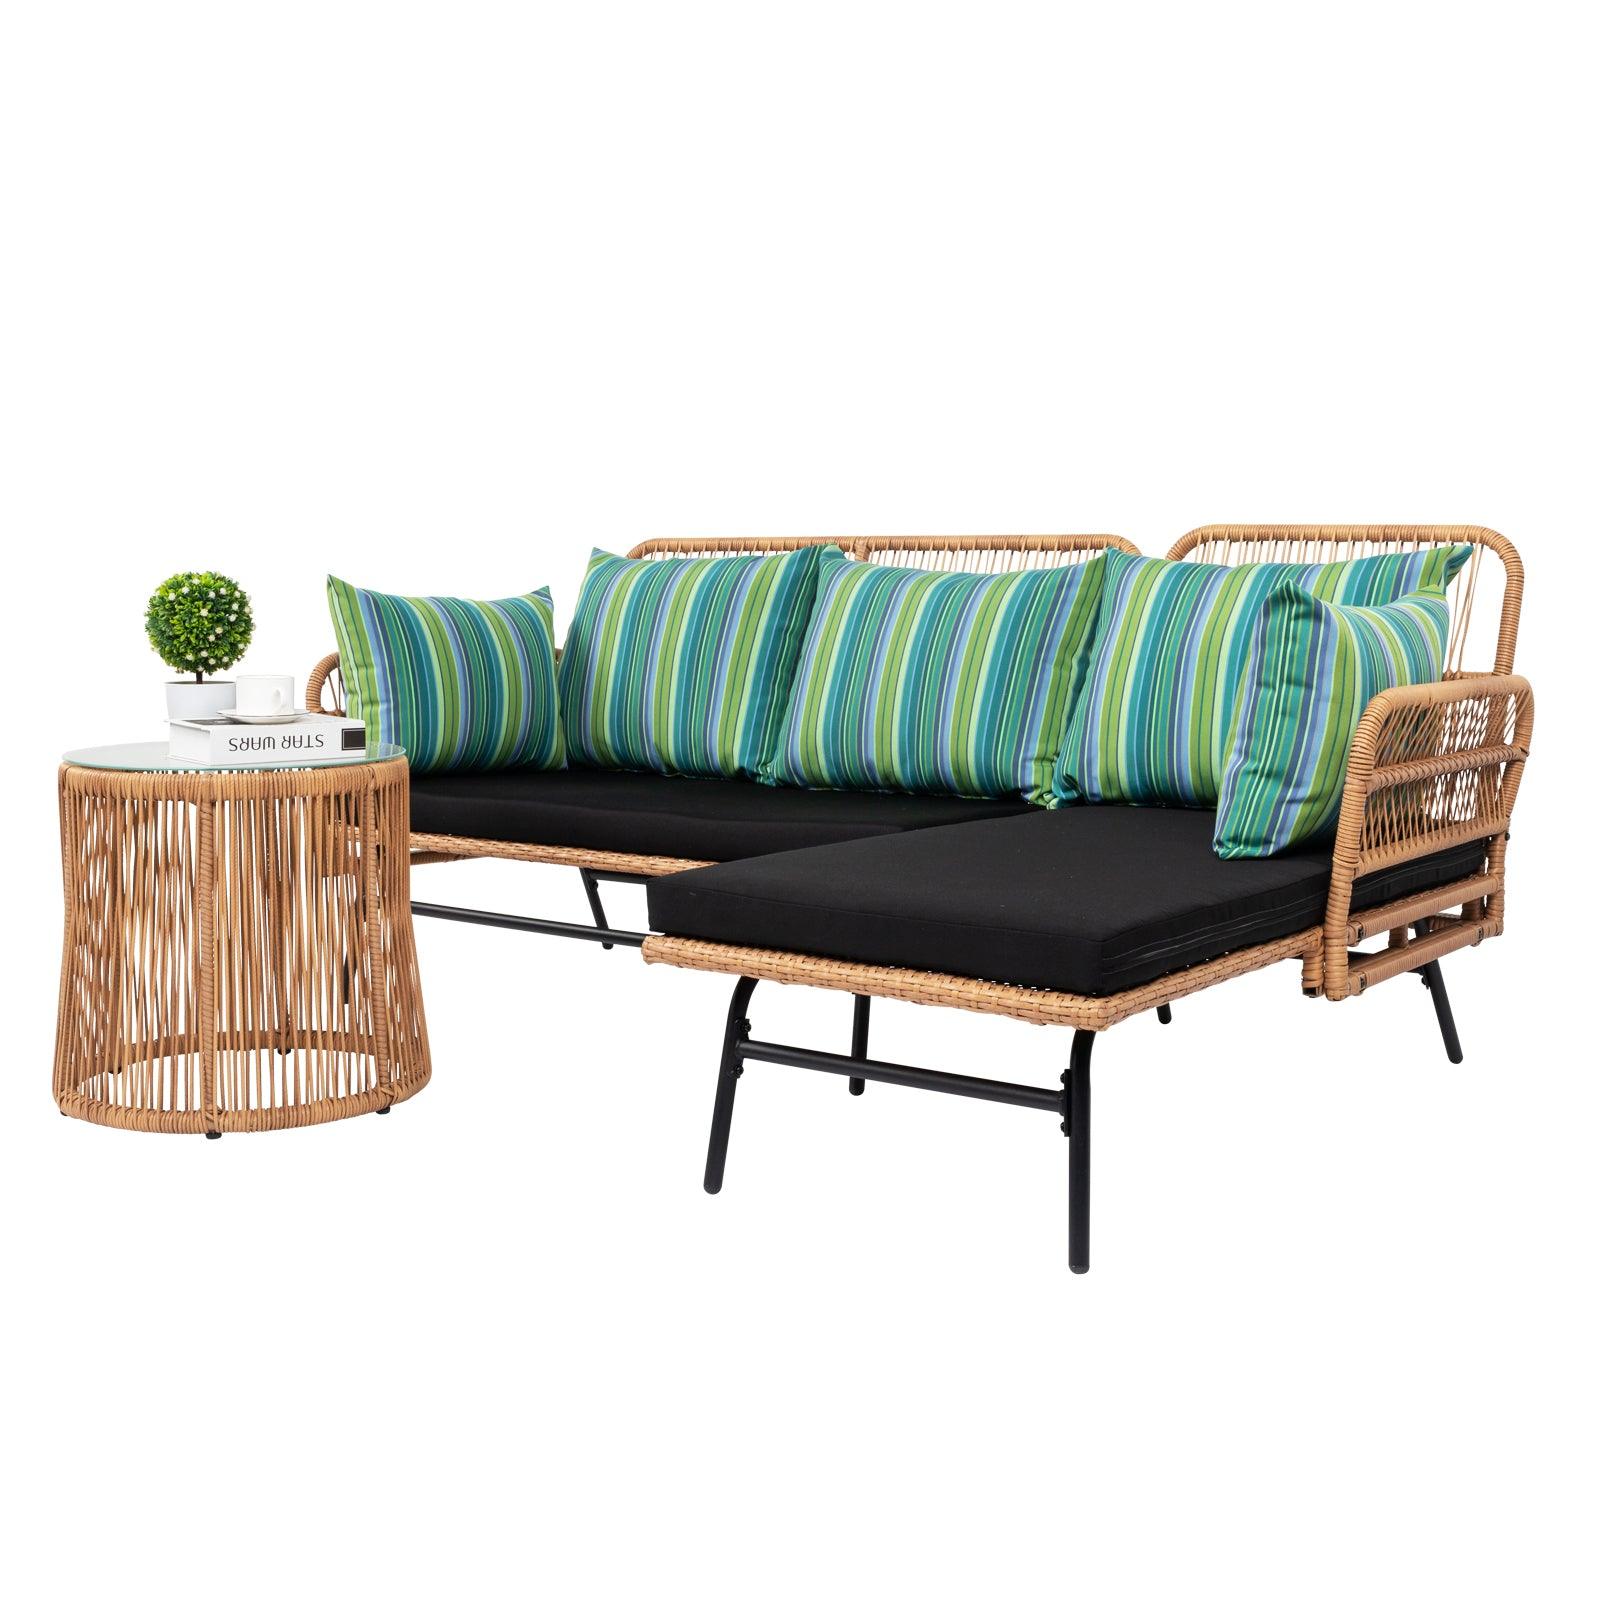 Patio Furniture 3 Piece Set, Rope Woven, Outdoor L-Shaped Garden Sectional Sofa Set, Detachable Lounger, Side Table - Charming Spaces